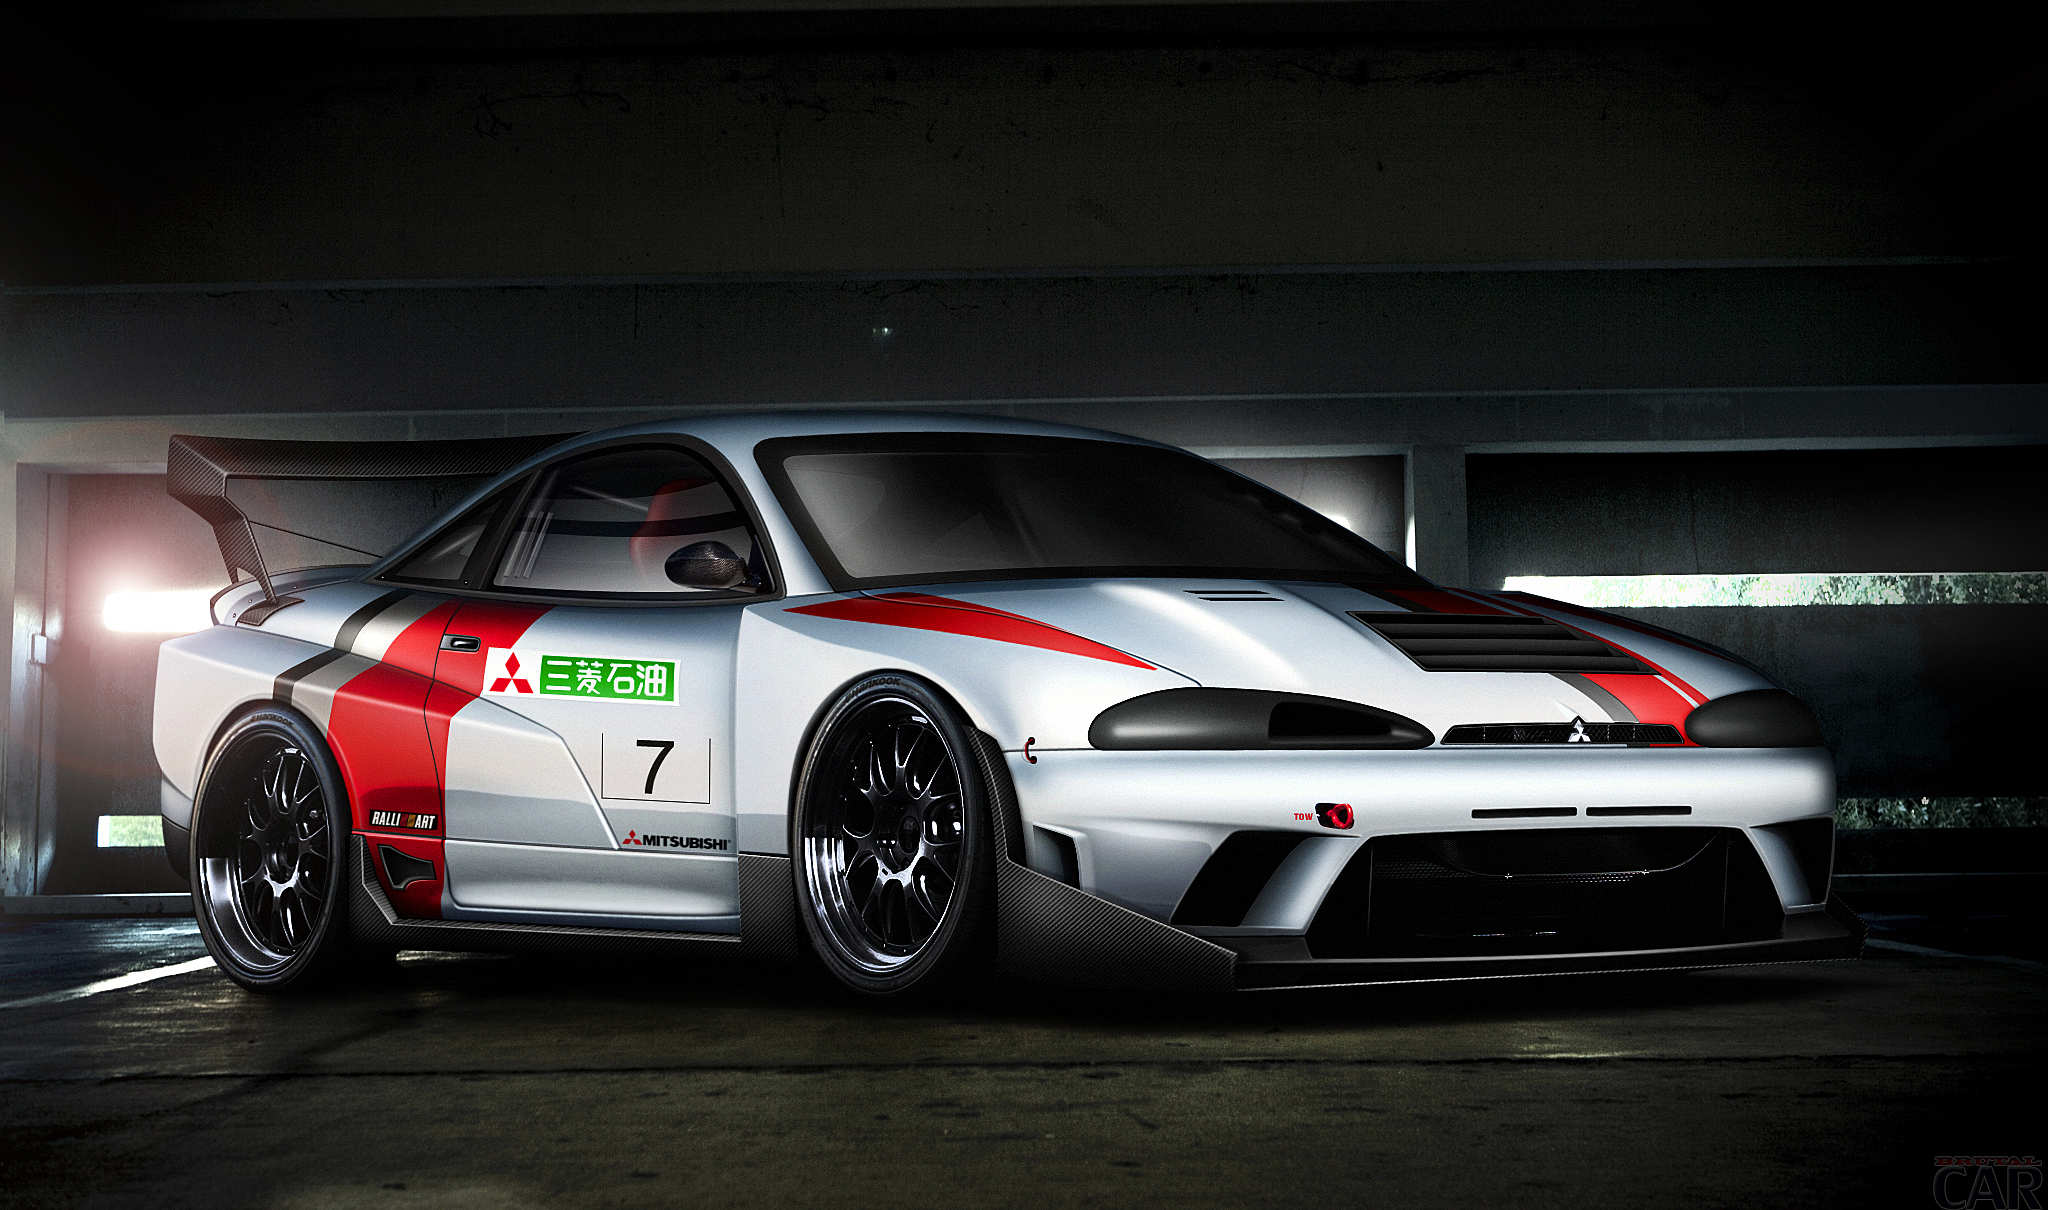 Racing Mitsubishi Eclipse. Download free HD pictures coolest cars.